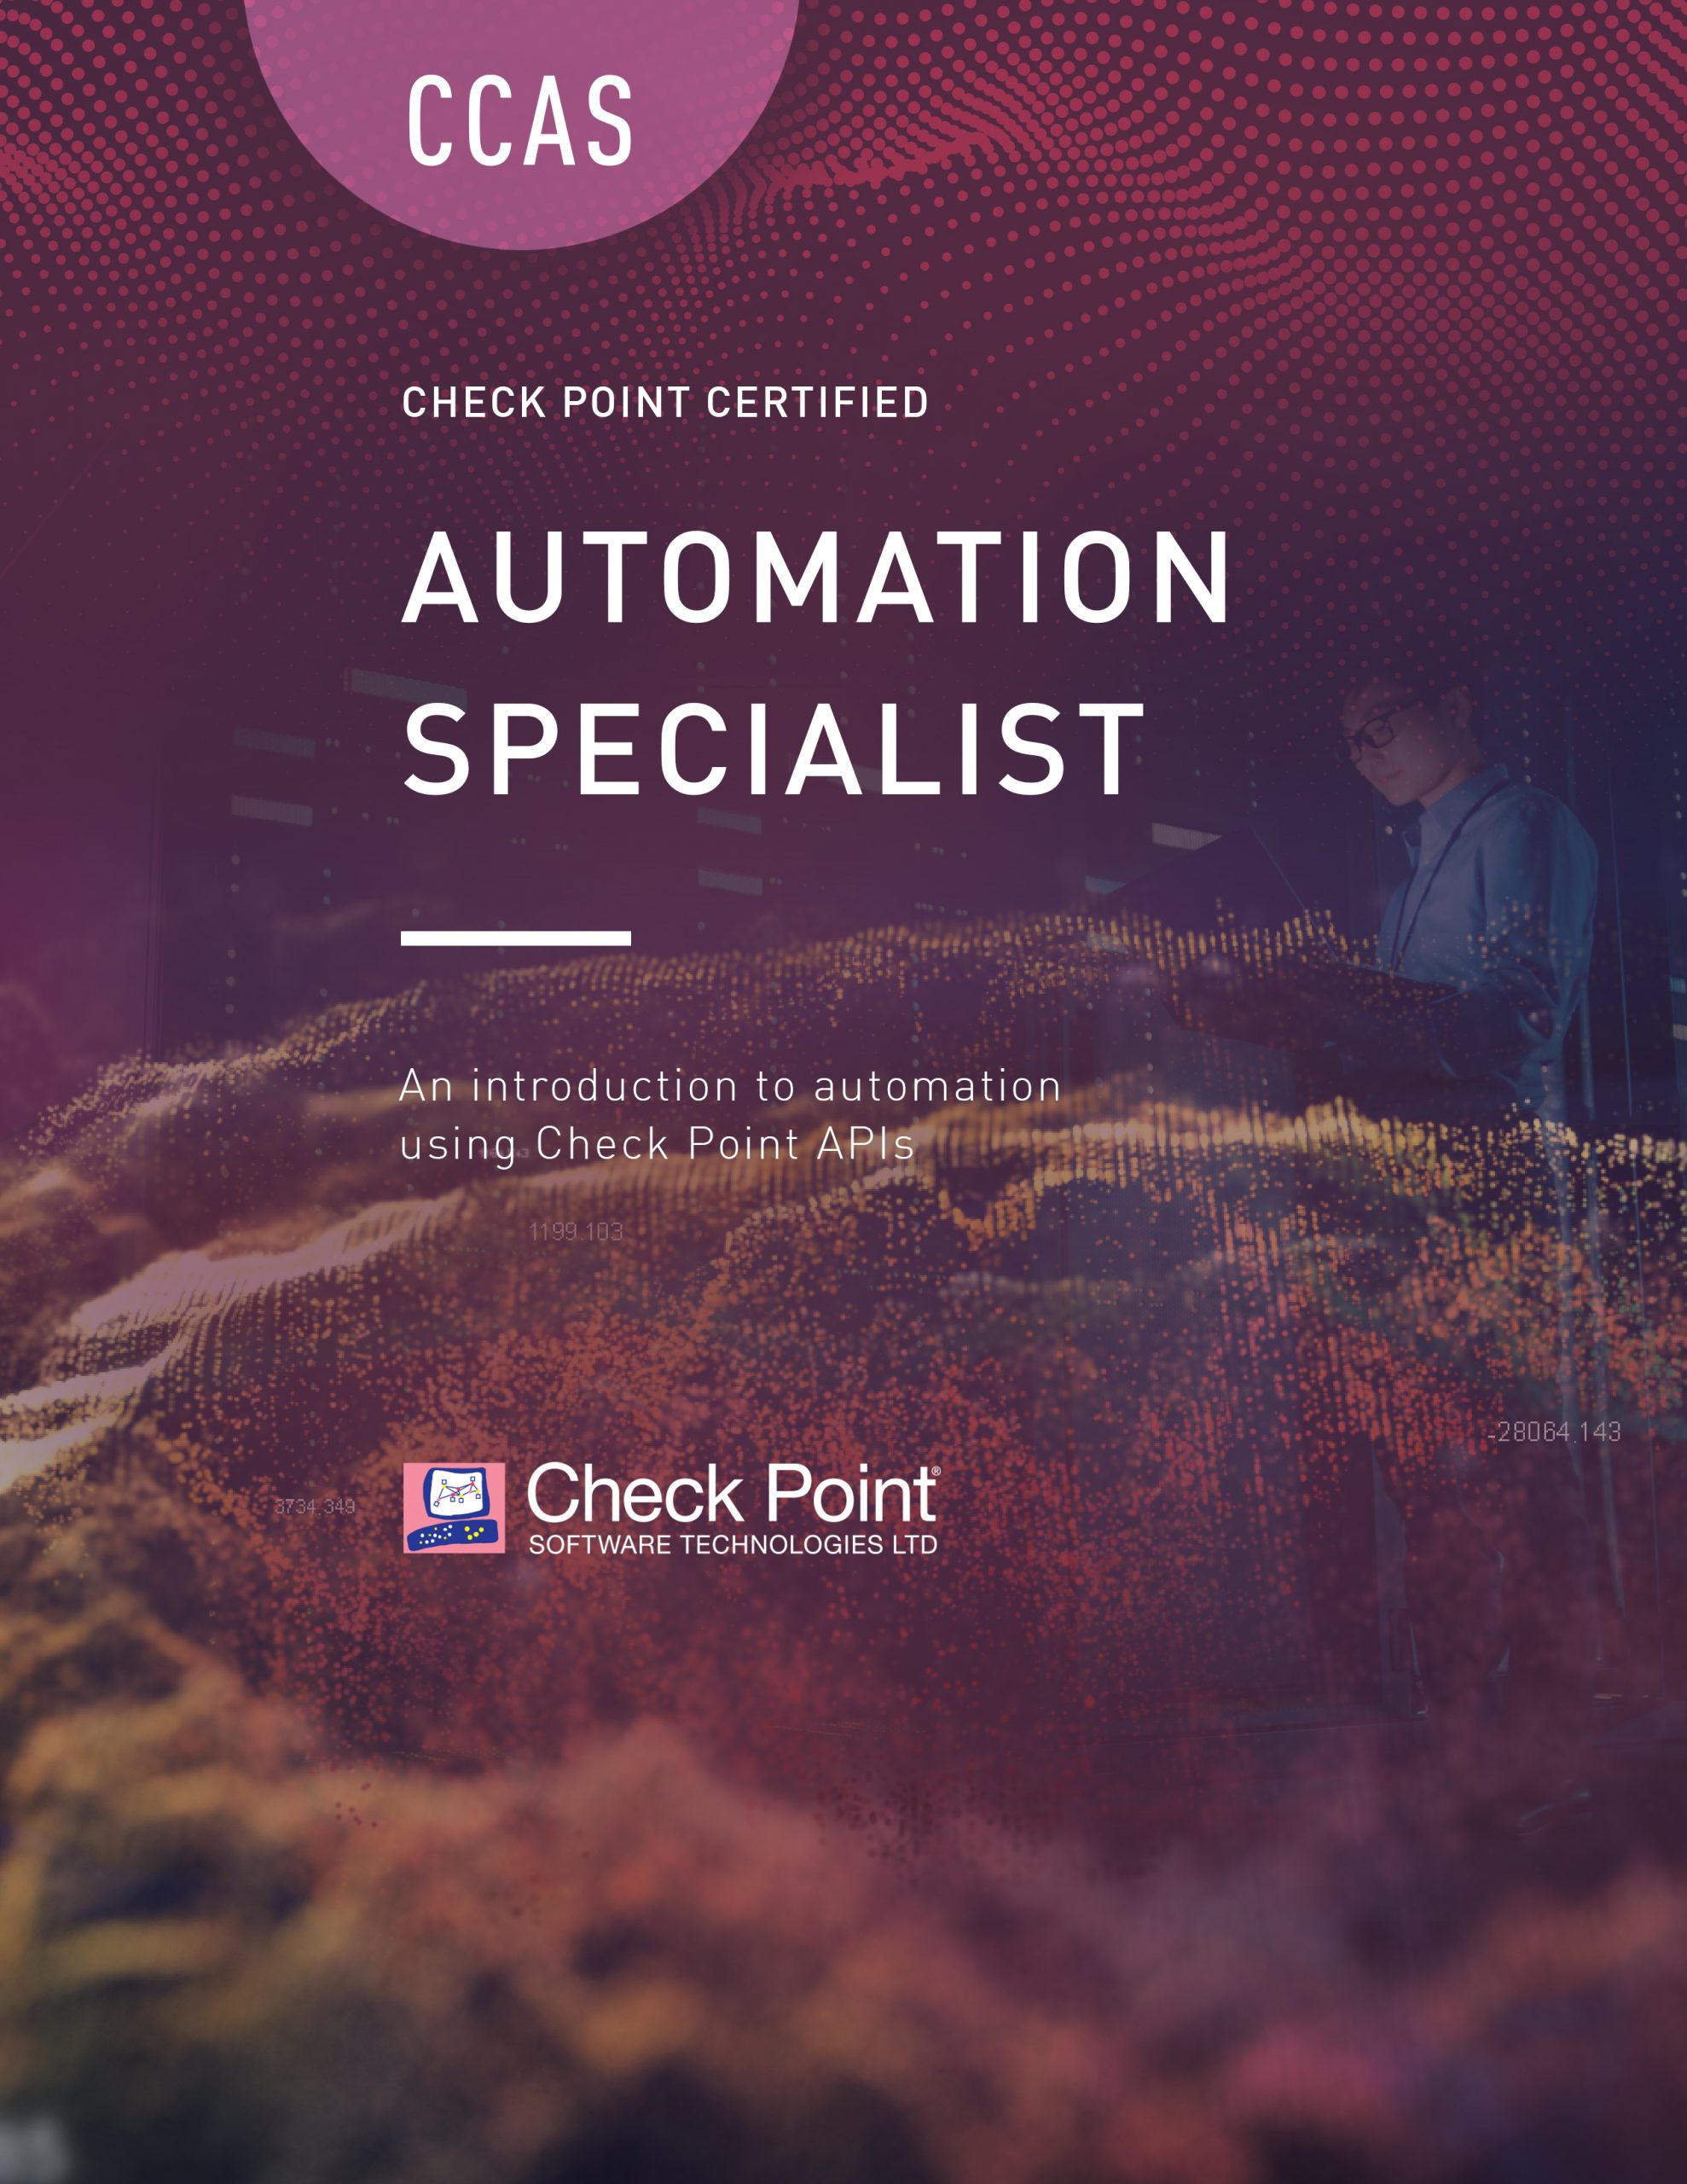 CCAS – Check Point Certified Automation Specialist (CCAS)